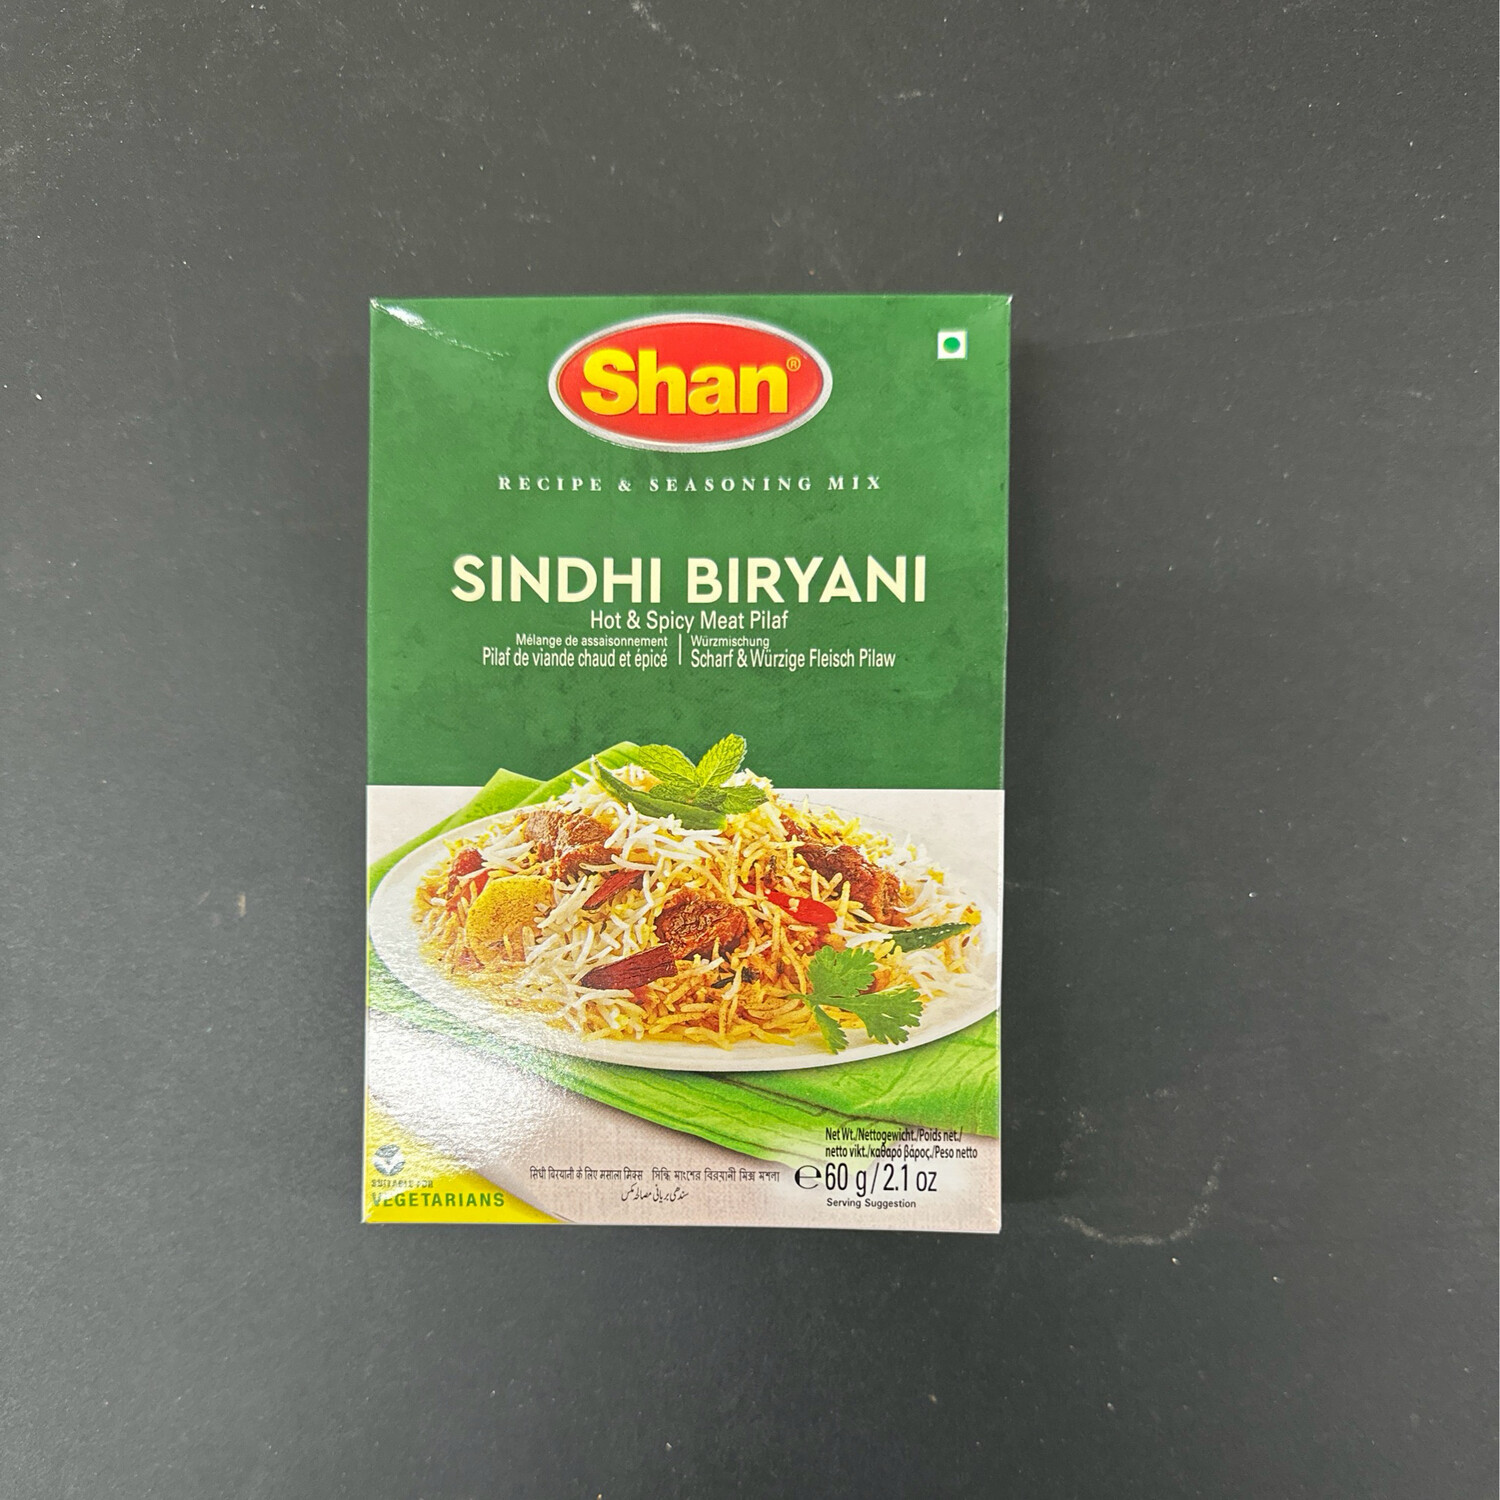 Shan - Sindhi Biryani (Spice Mix for Rice Dishes with Meat) - 60g